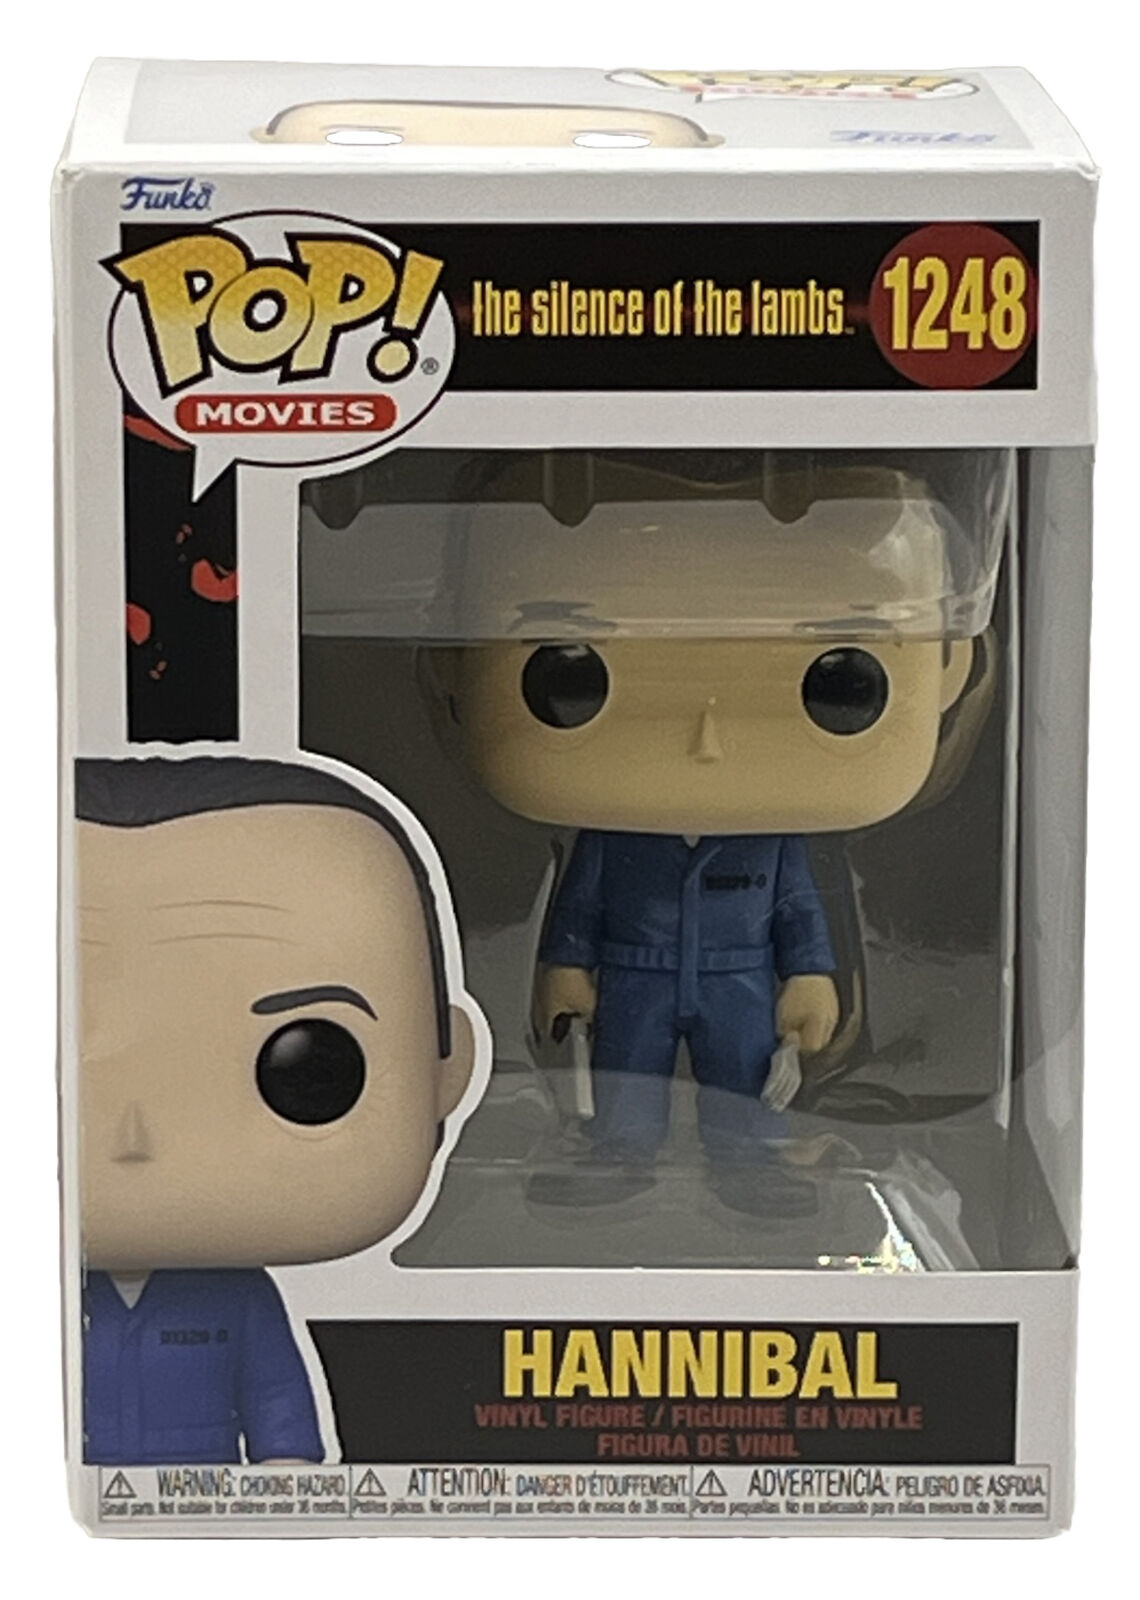 Hannibal Lecter The Silence Of The Lambs Funko Pop Vinyl Collector